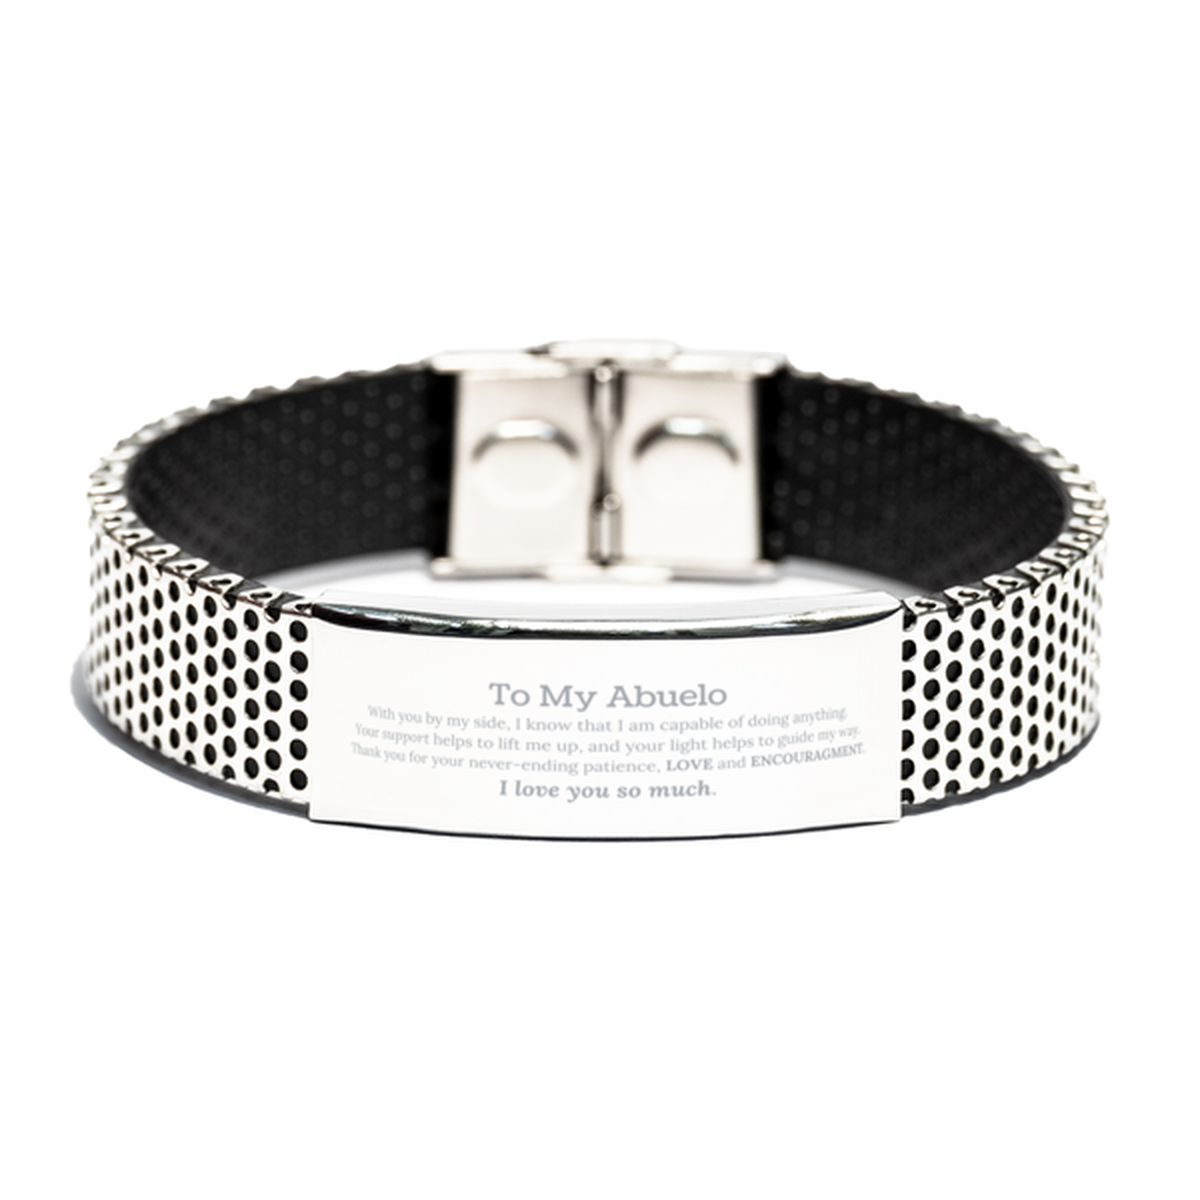 Appreciation Abuelo Stainless Steel Bracelet Gifts, To My Abuelo Birthday Christmas Wedding Keepsake Gifts for Abuelo With you by my side, I know that I am capable of doing anything. I love you so much